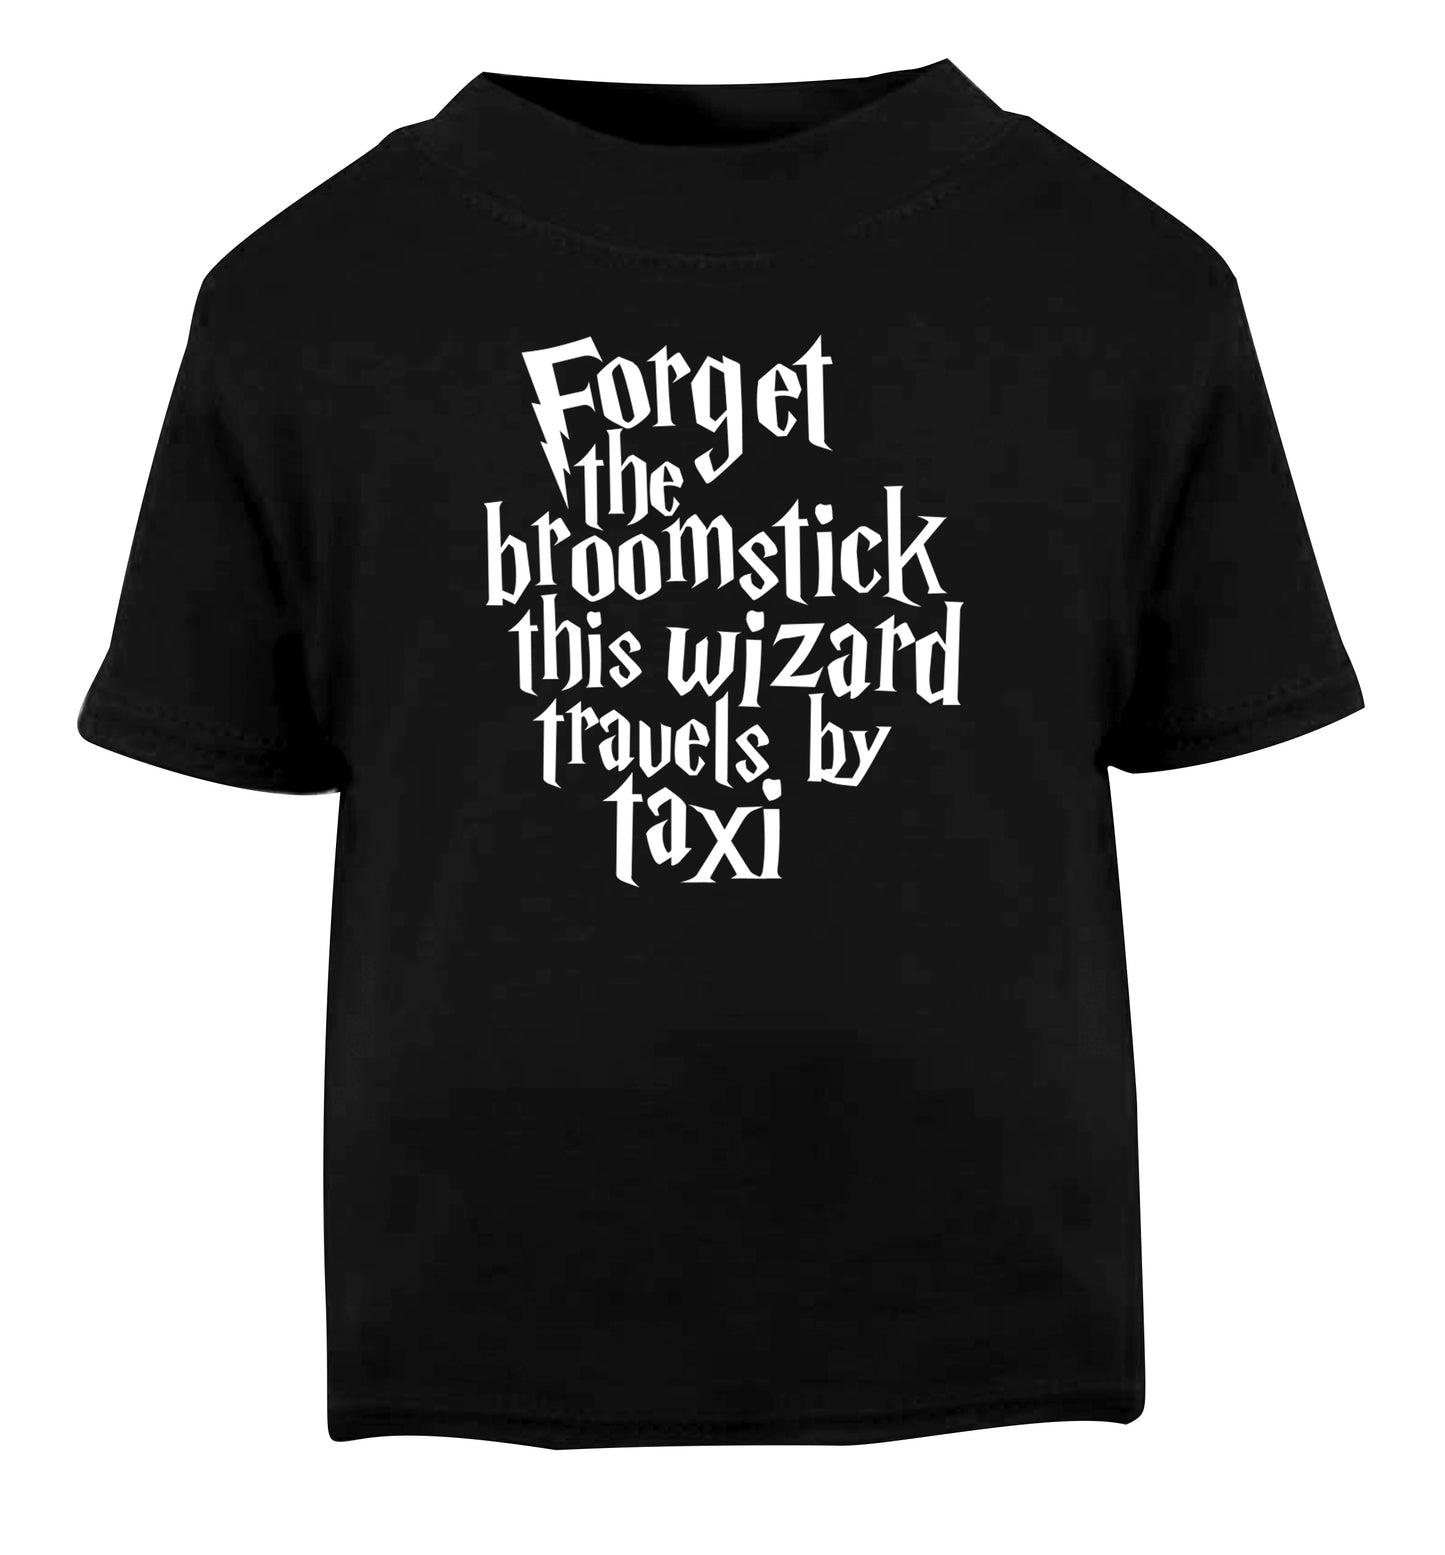 Forget the broomstick this wizard travels by taxi Black Baby Toddler Tshirt 2 years